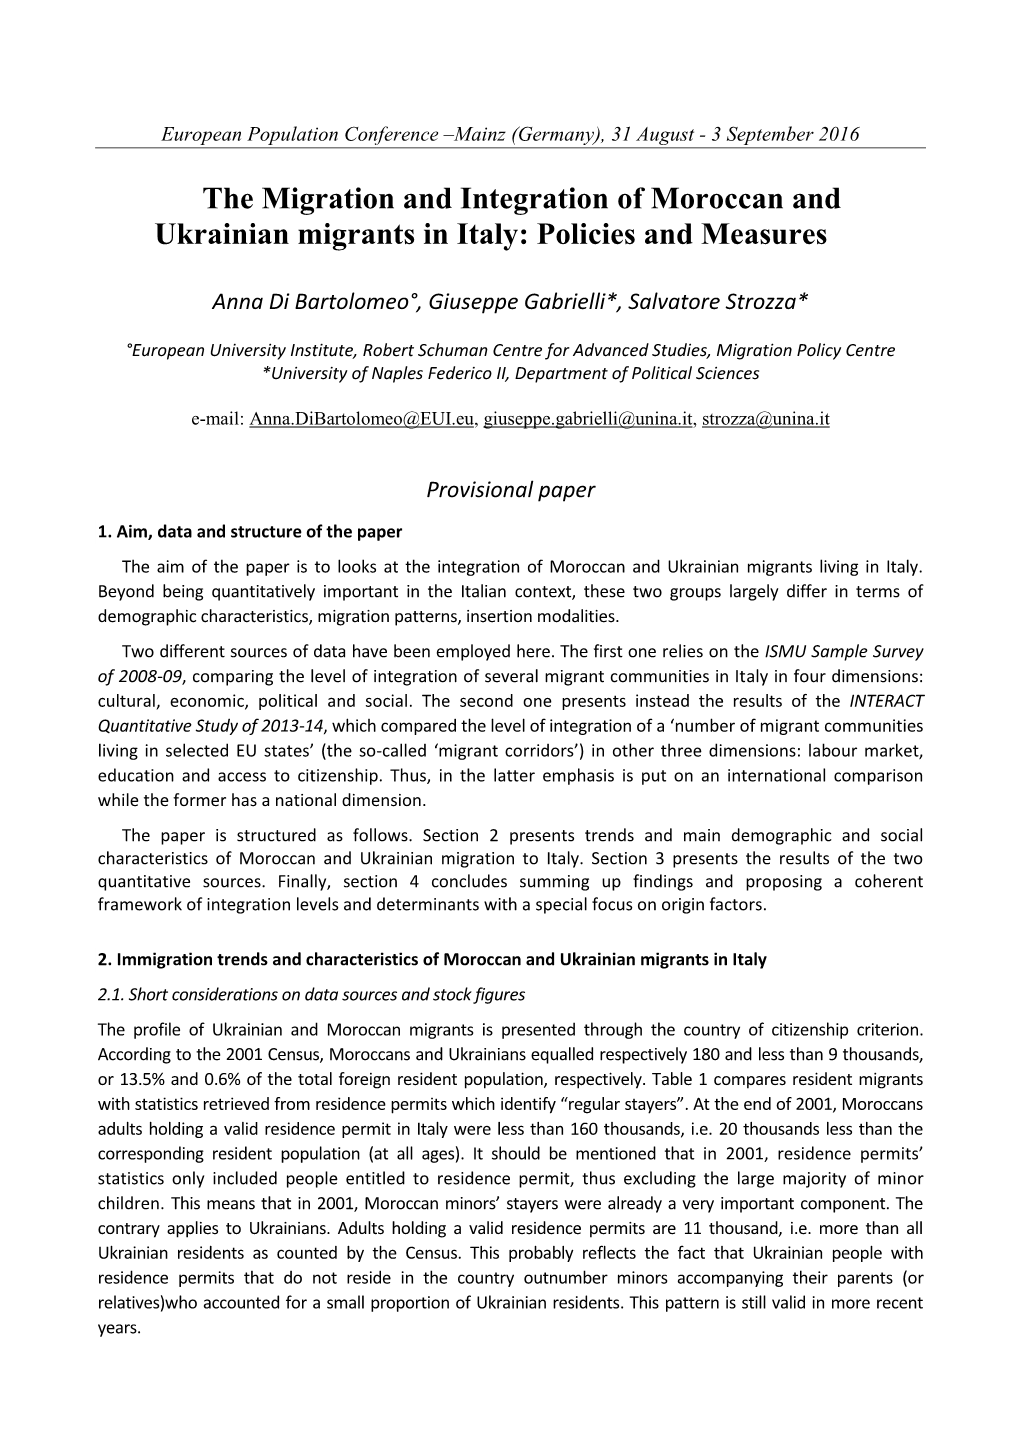 The Migration and Integration of Moroccan and Ukrainian Migrants in Italy: Policies and Measures